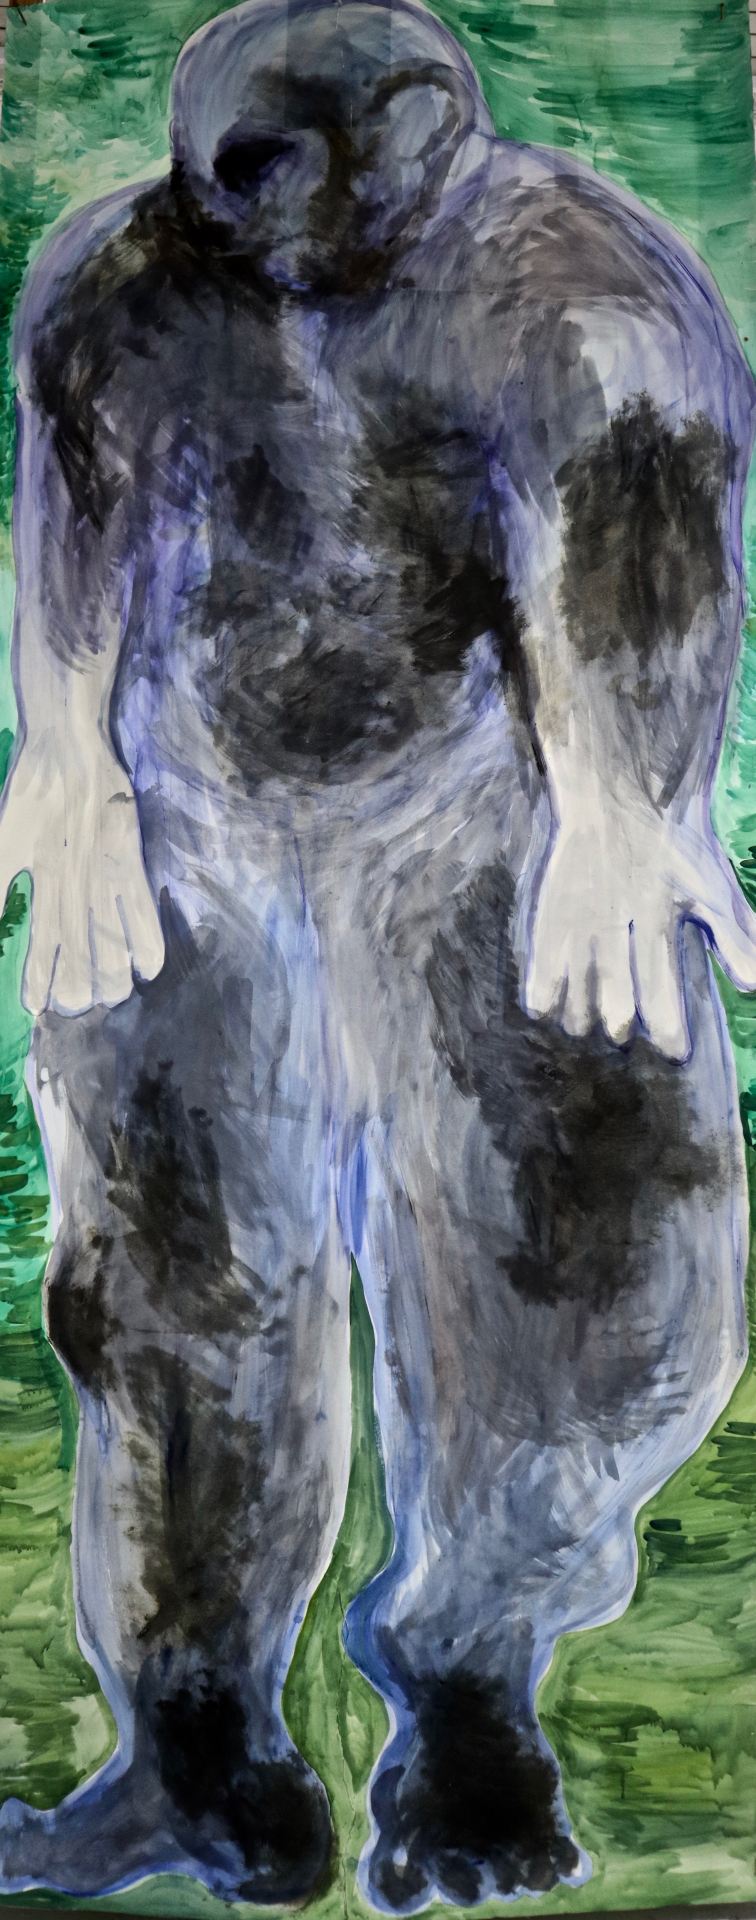 A drawing of a faceless giant against a green background.